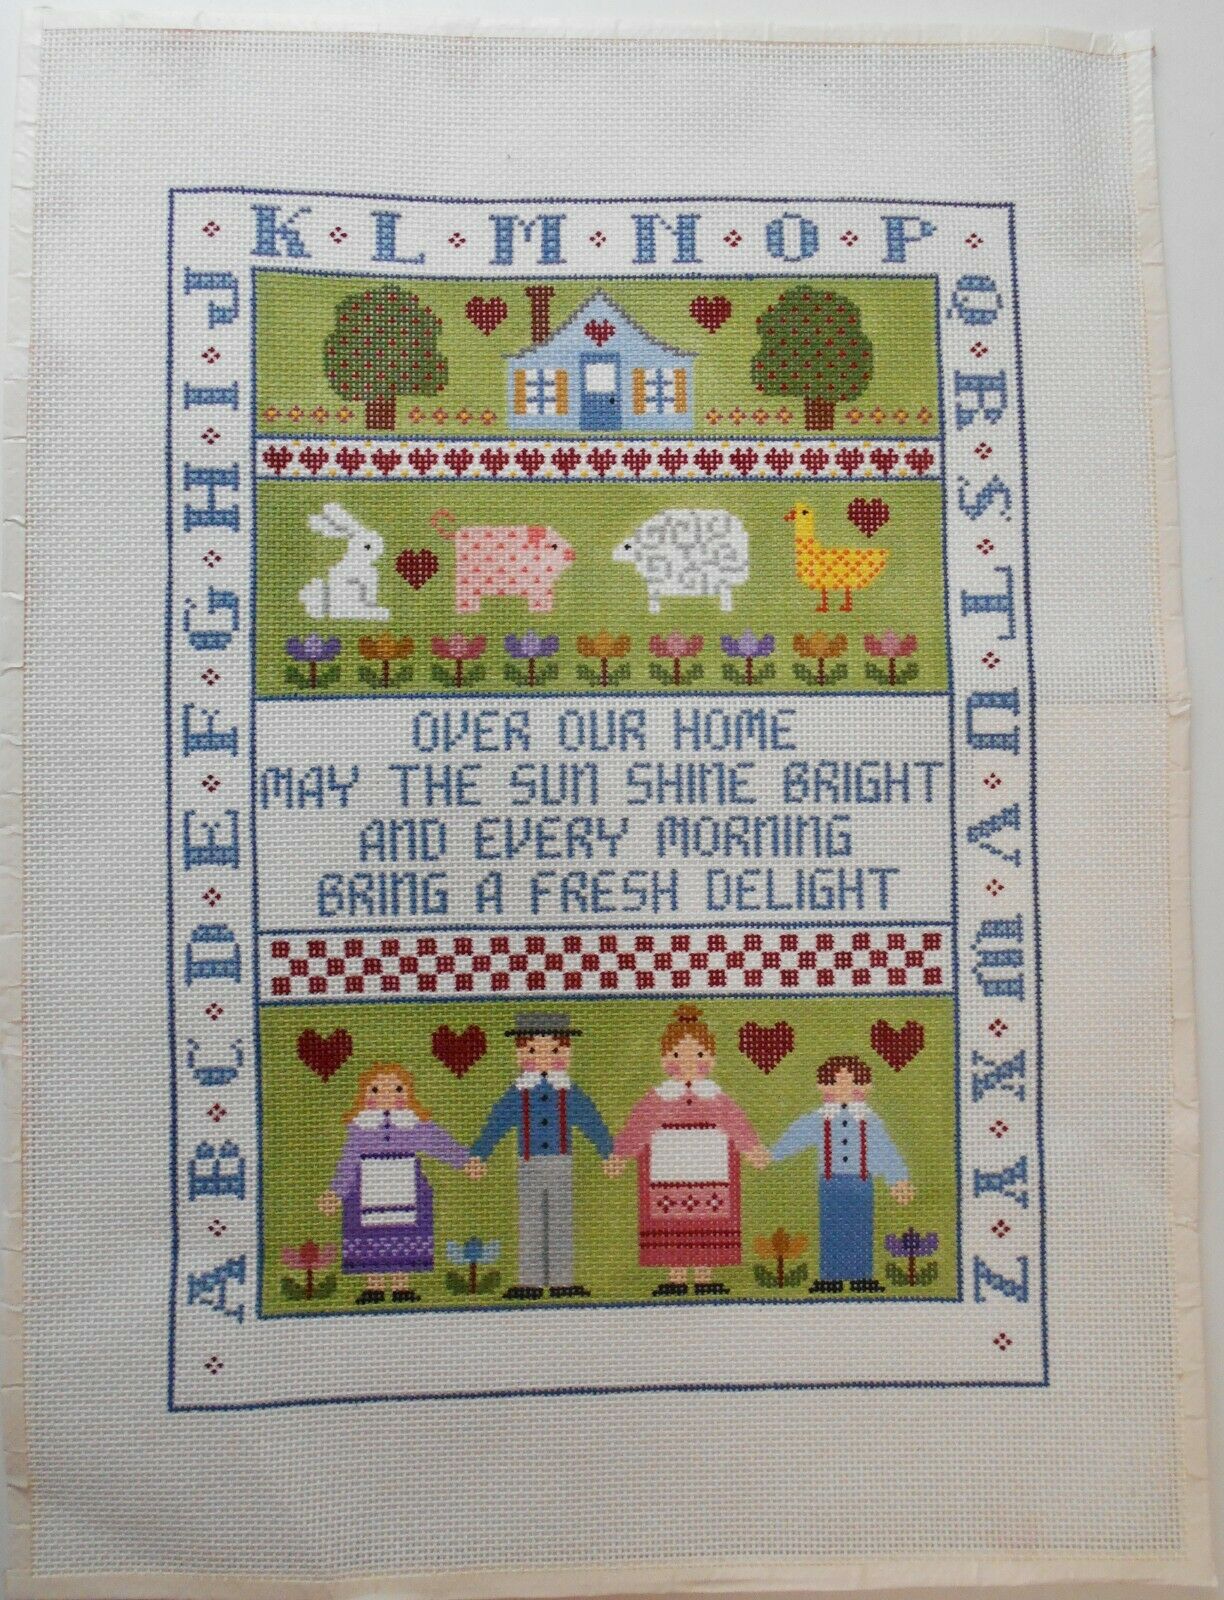 Needlepoint Canvas Sampler Hand Painted By Susan Treglown 20" X 15" Overall